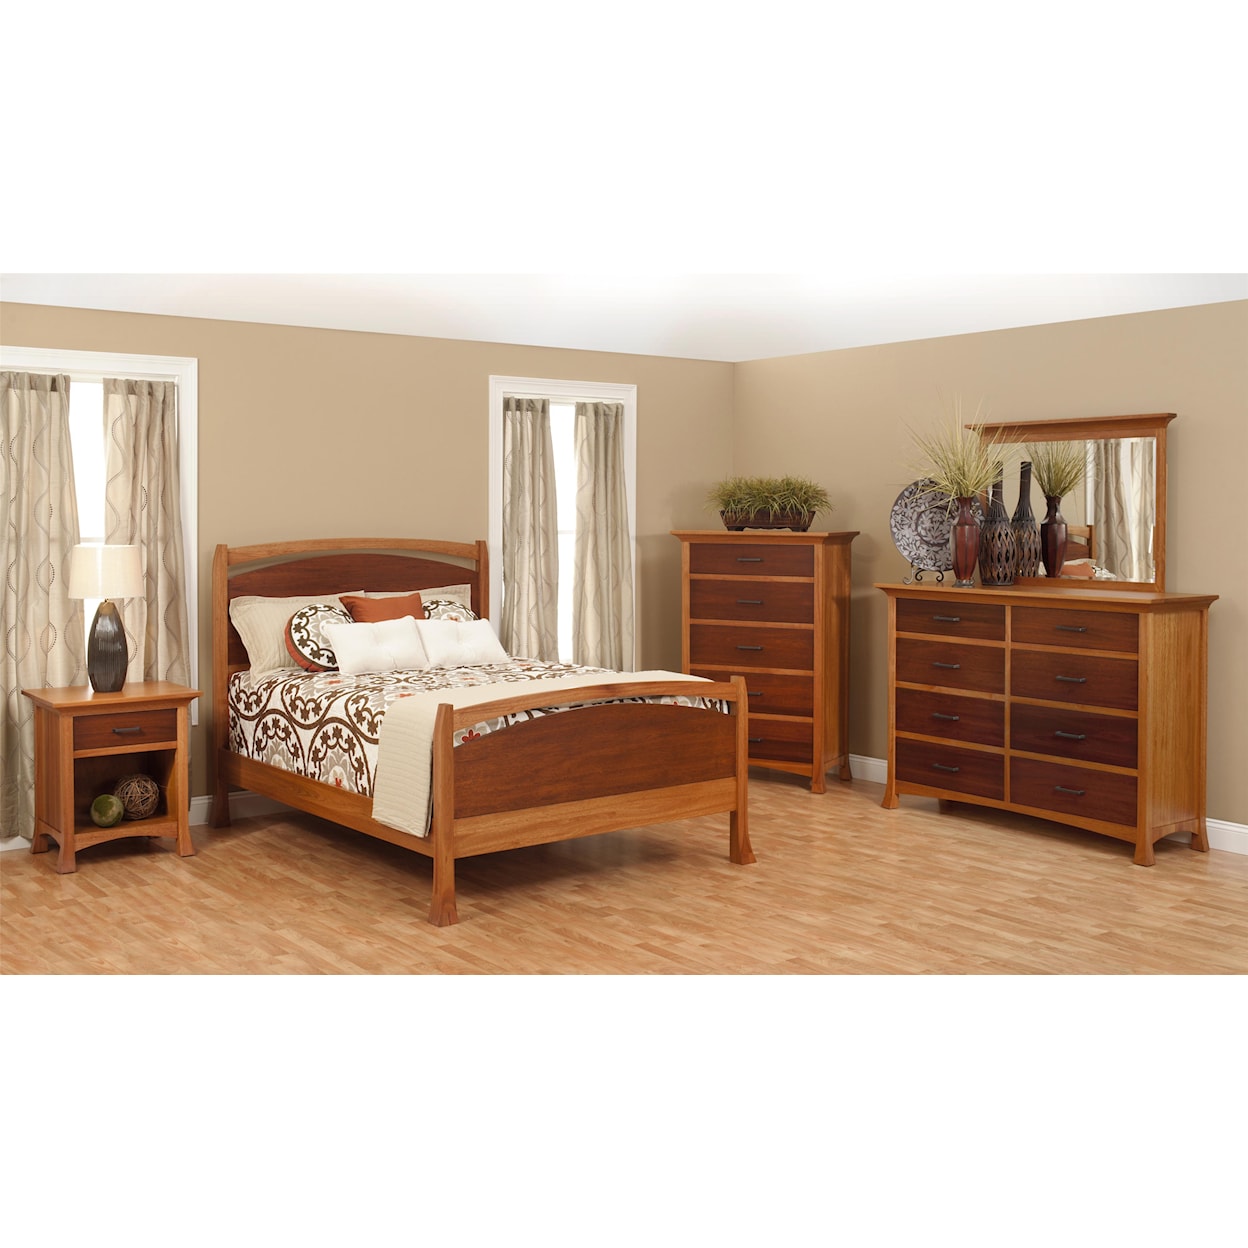 Millcraft Oasis Full Panel Bed